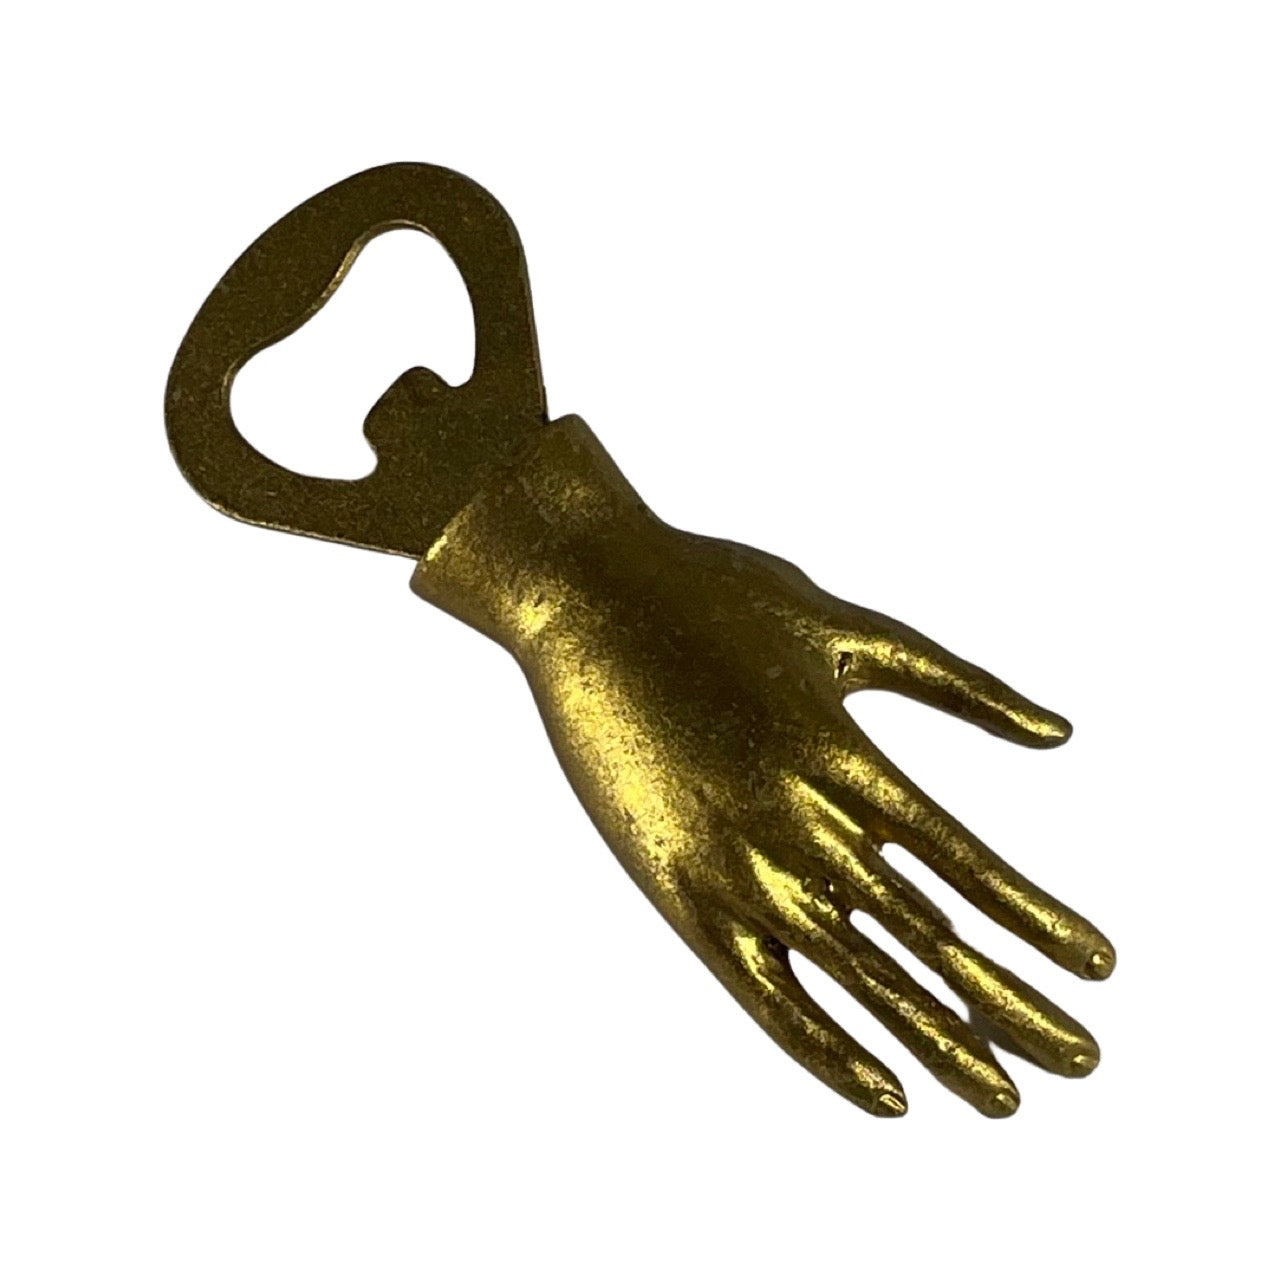 Top side image of a gold finish cast iron hand shape bottle opener.